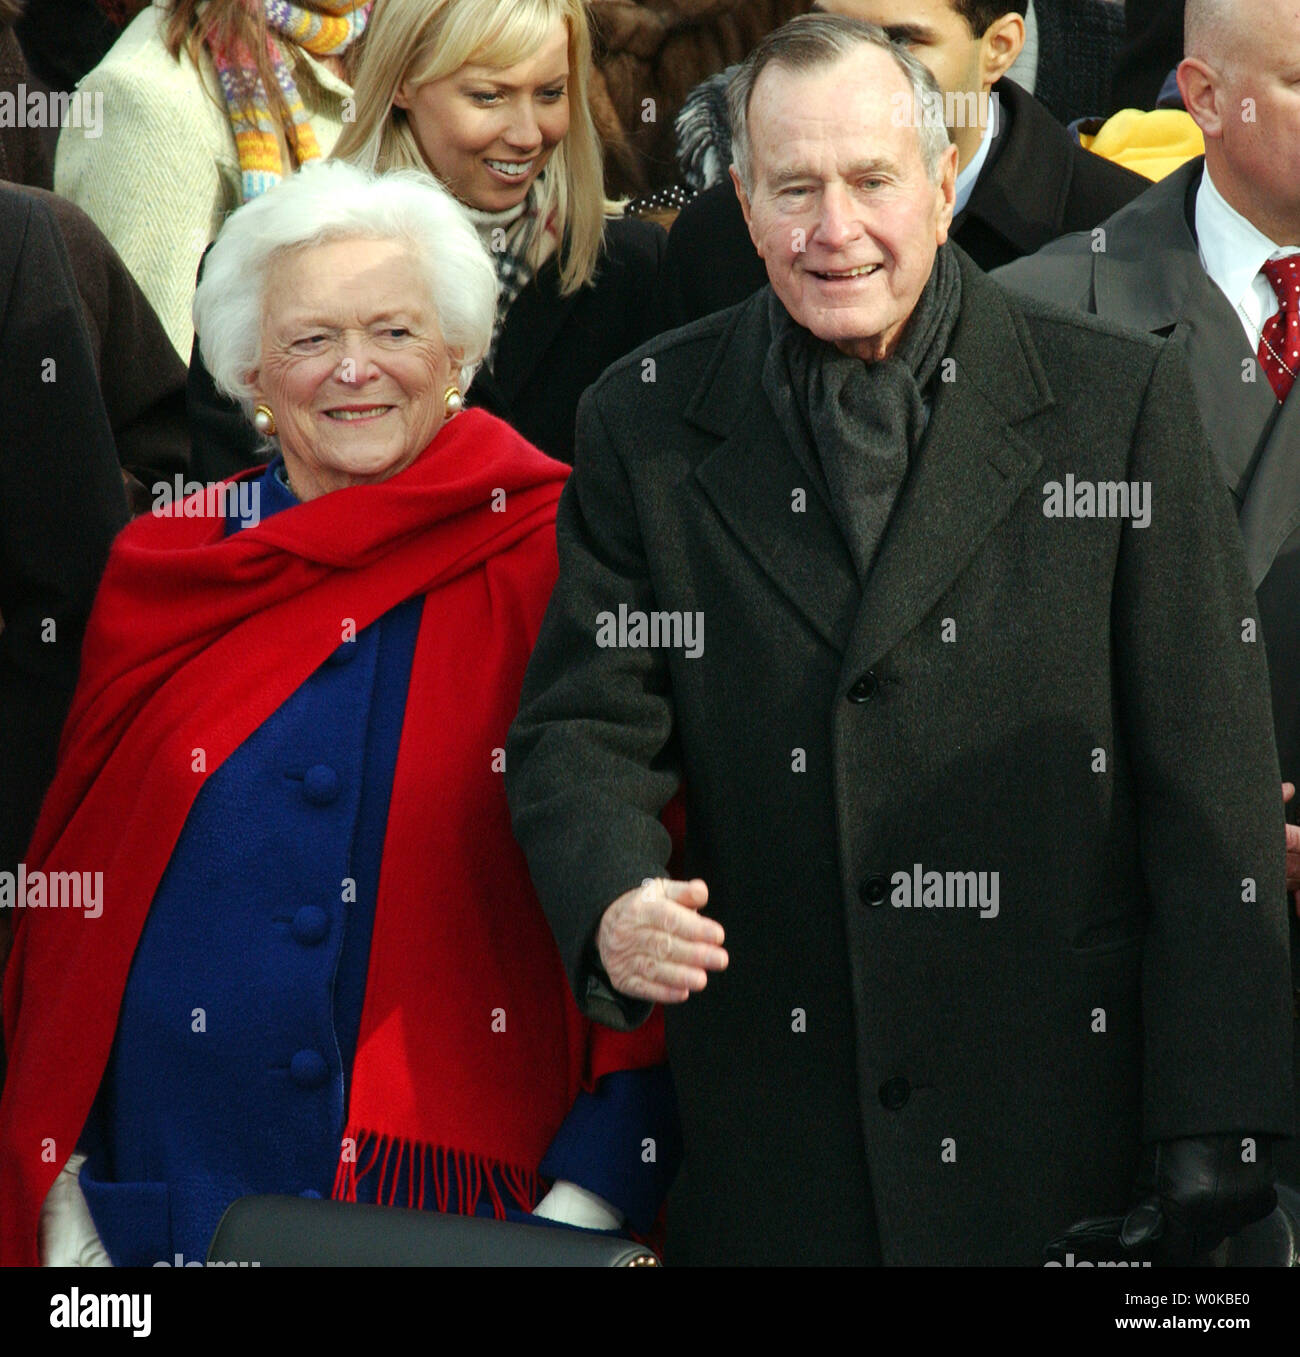 In this file photo, former President George H. W. Bush and his wife Barbara arrive for their son President George W. Bush's second inaugural ceremony on Capitol Hill on Jan. 20, 2005, in Washington.    UPI Photo/Doug Mills Stock Photo